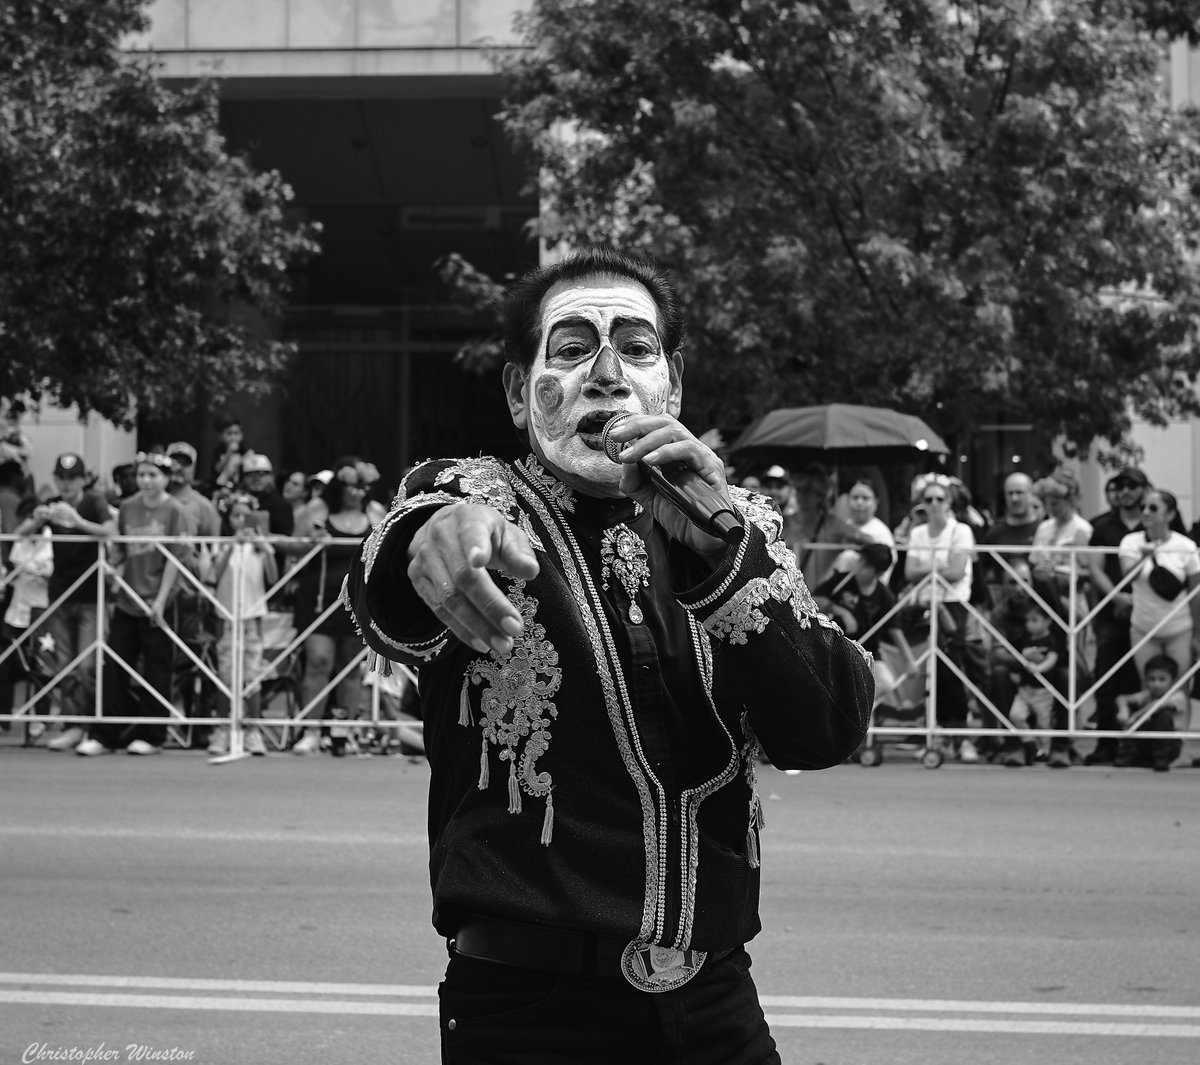 #austintx #dayofthedead #peopleonthestreet #austinlife #peoplethatIsee #leicaphotography #bnw #bnwphotography